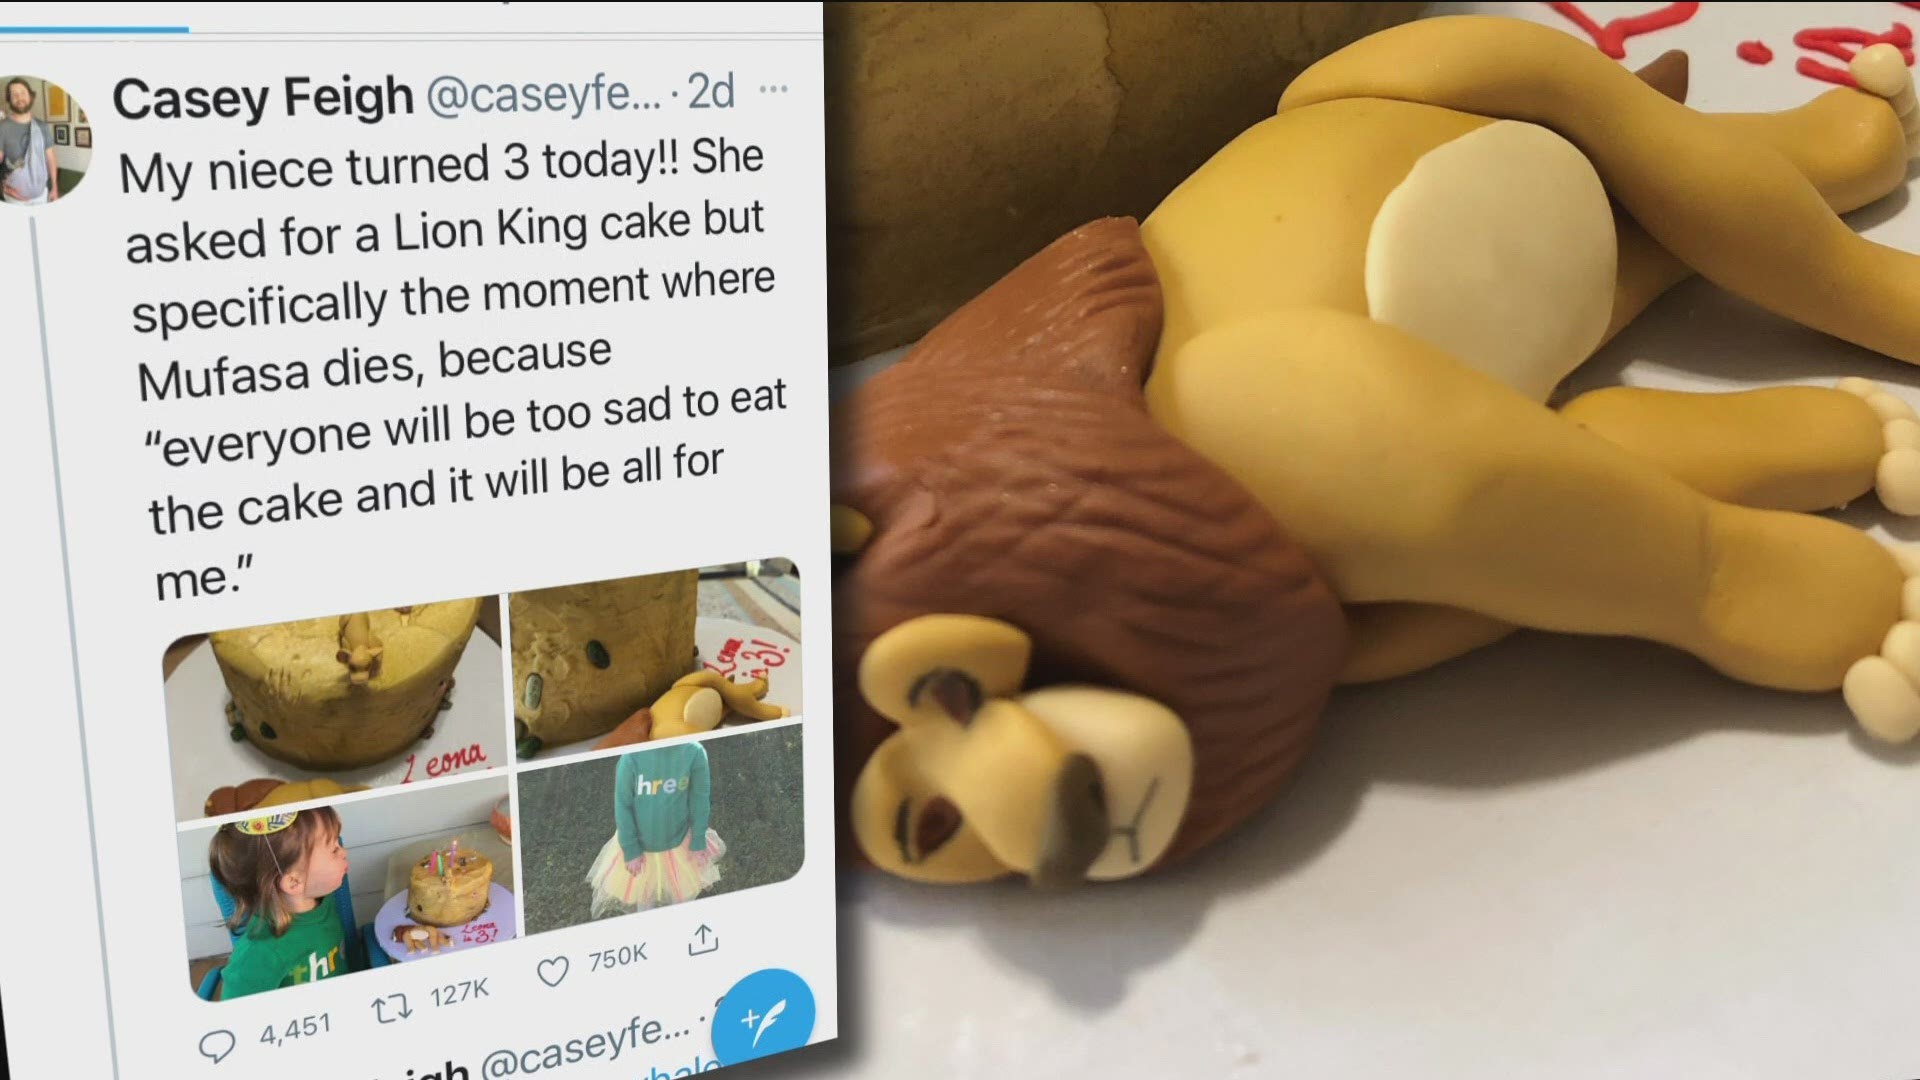 After her uncle tweeted out the picture of her unique Lion King birthday cake, 3-year-old Leona of St. Paul has received some serious on-air and online love.